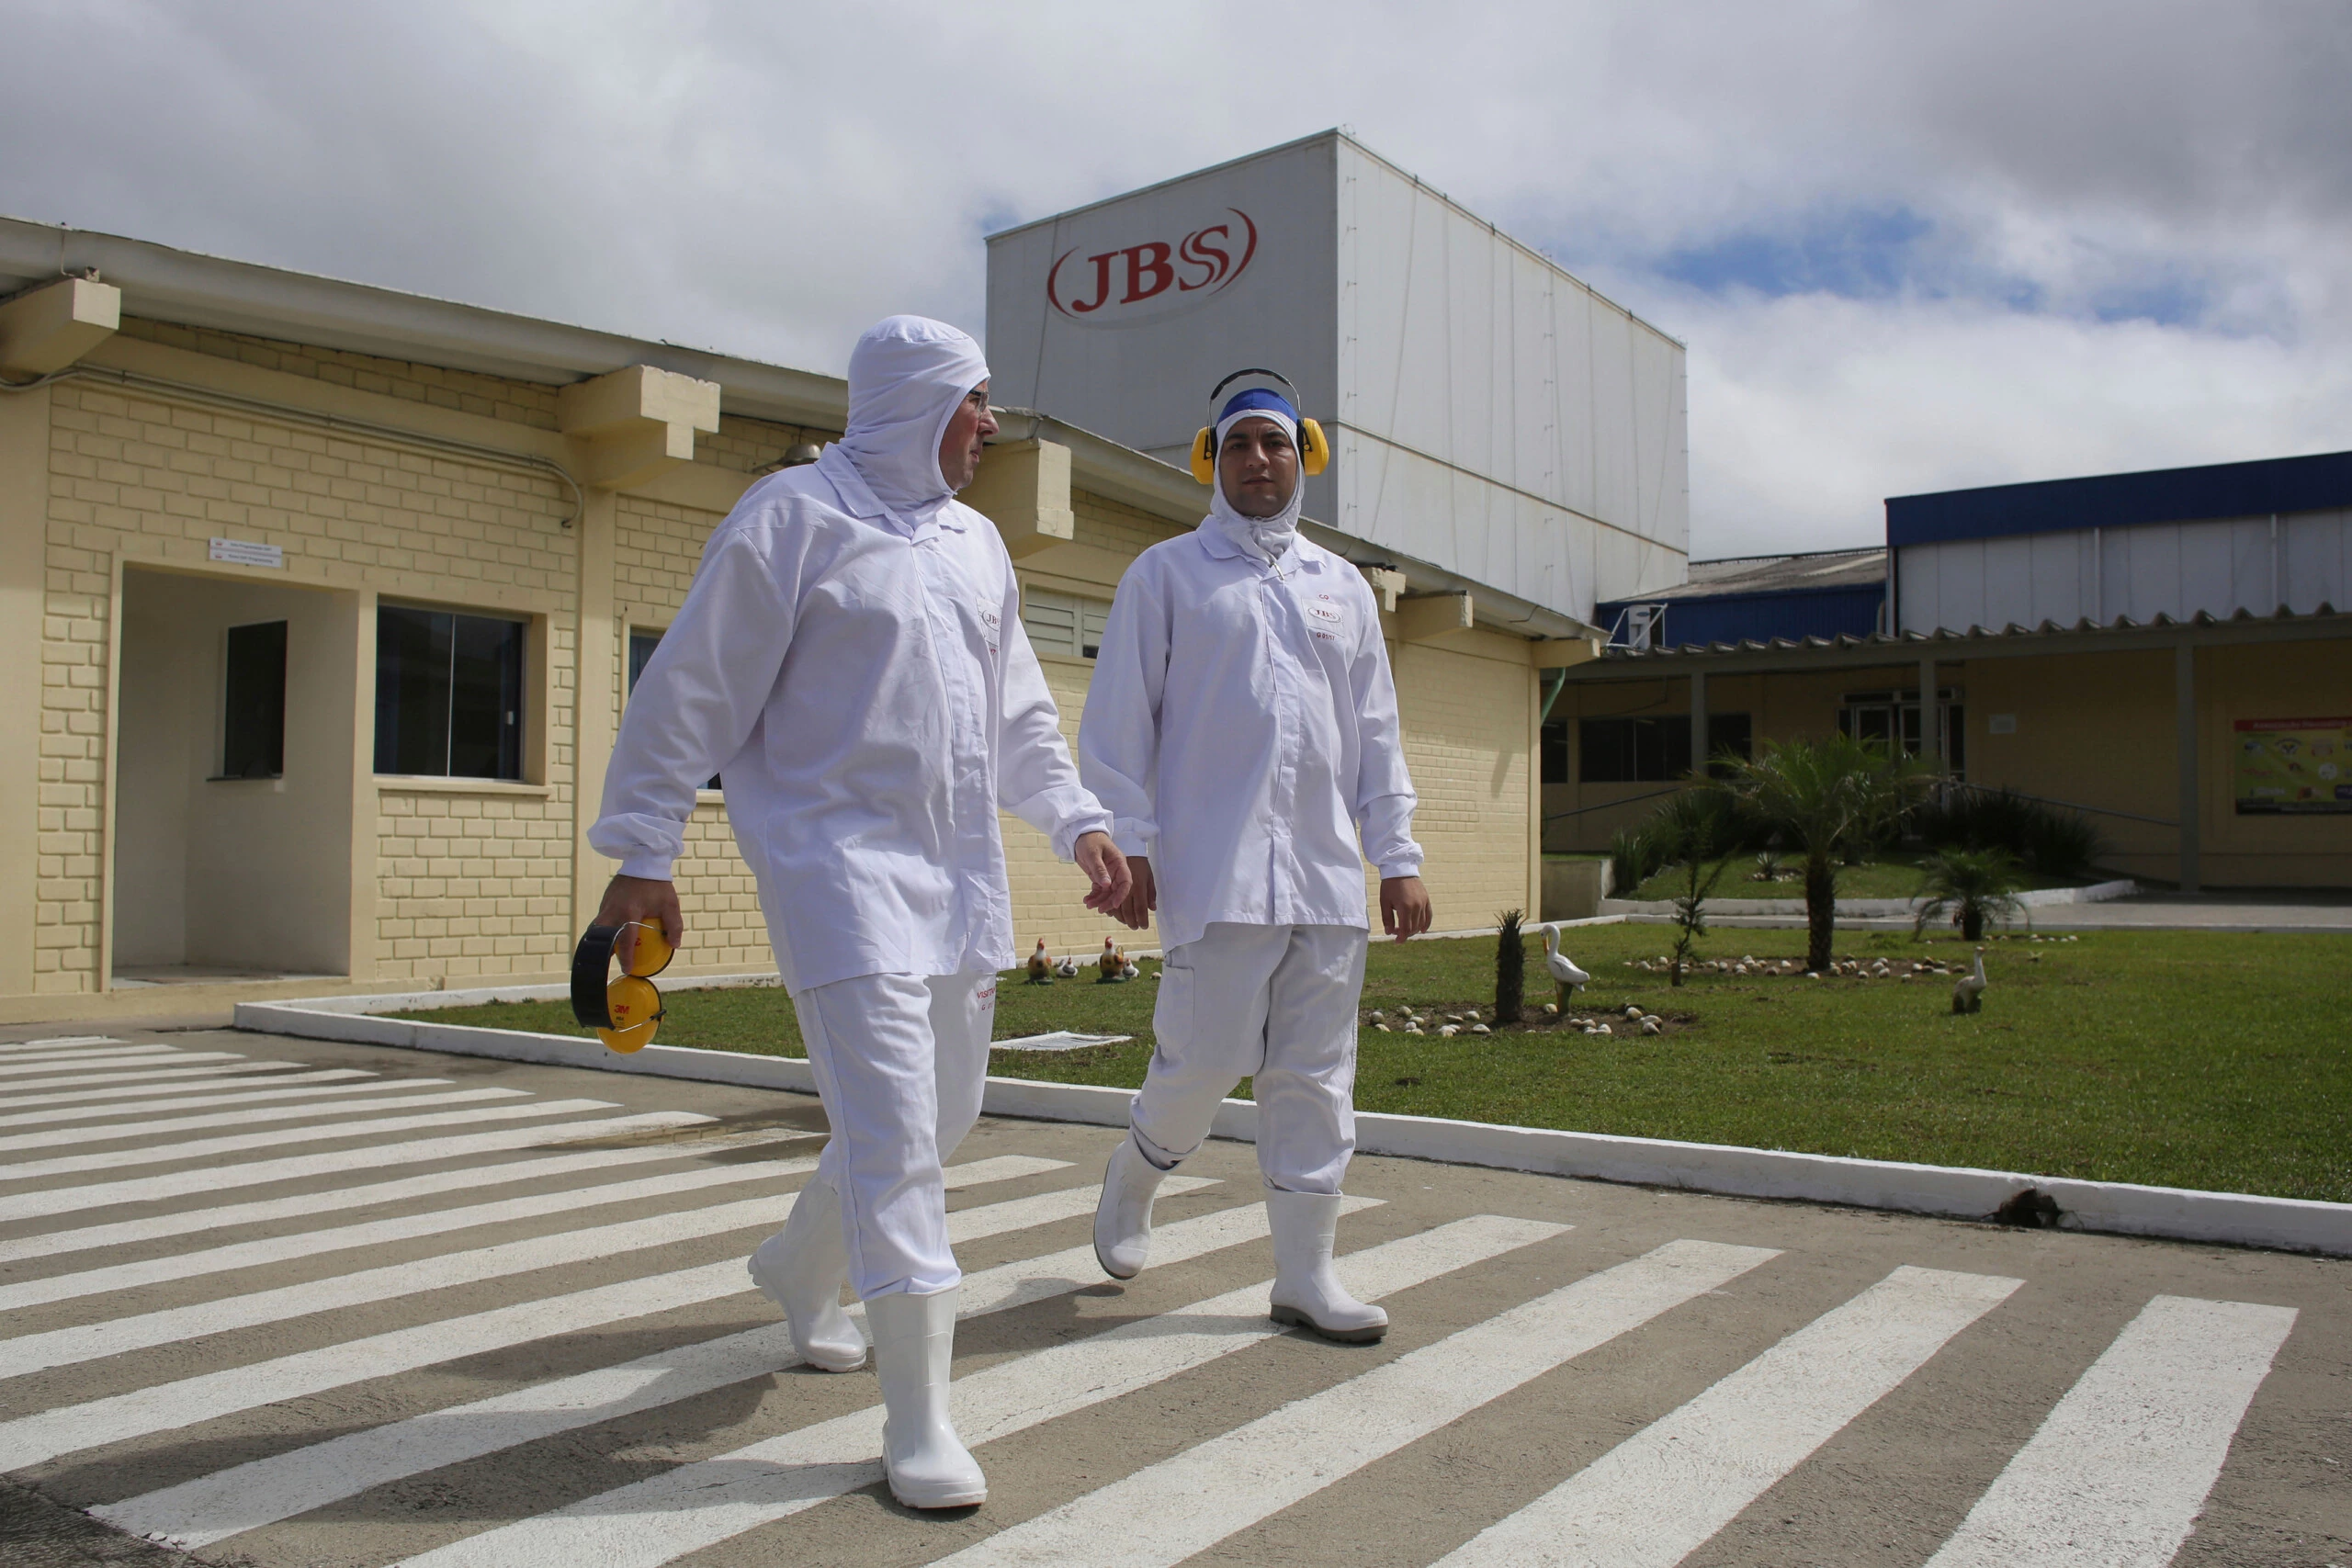 FILE - In this March 21, 2017 file photo, employees walk on the plant grounds of meatpacker JBS, in Lapa, in the Brazilian state of Parana. The European Union said Thursday, April 19, 2018, to ban meat imports from 20 Brazilian plants amid concerns about sanitary controls. The decision mostly affects poultry.  (AP Photo/Eraldo Peres, File)